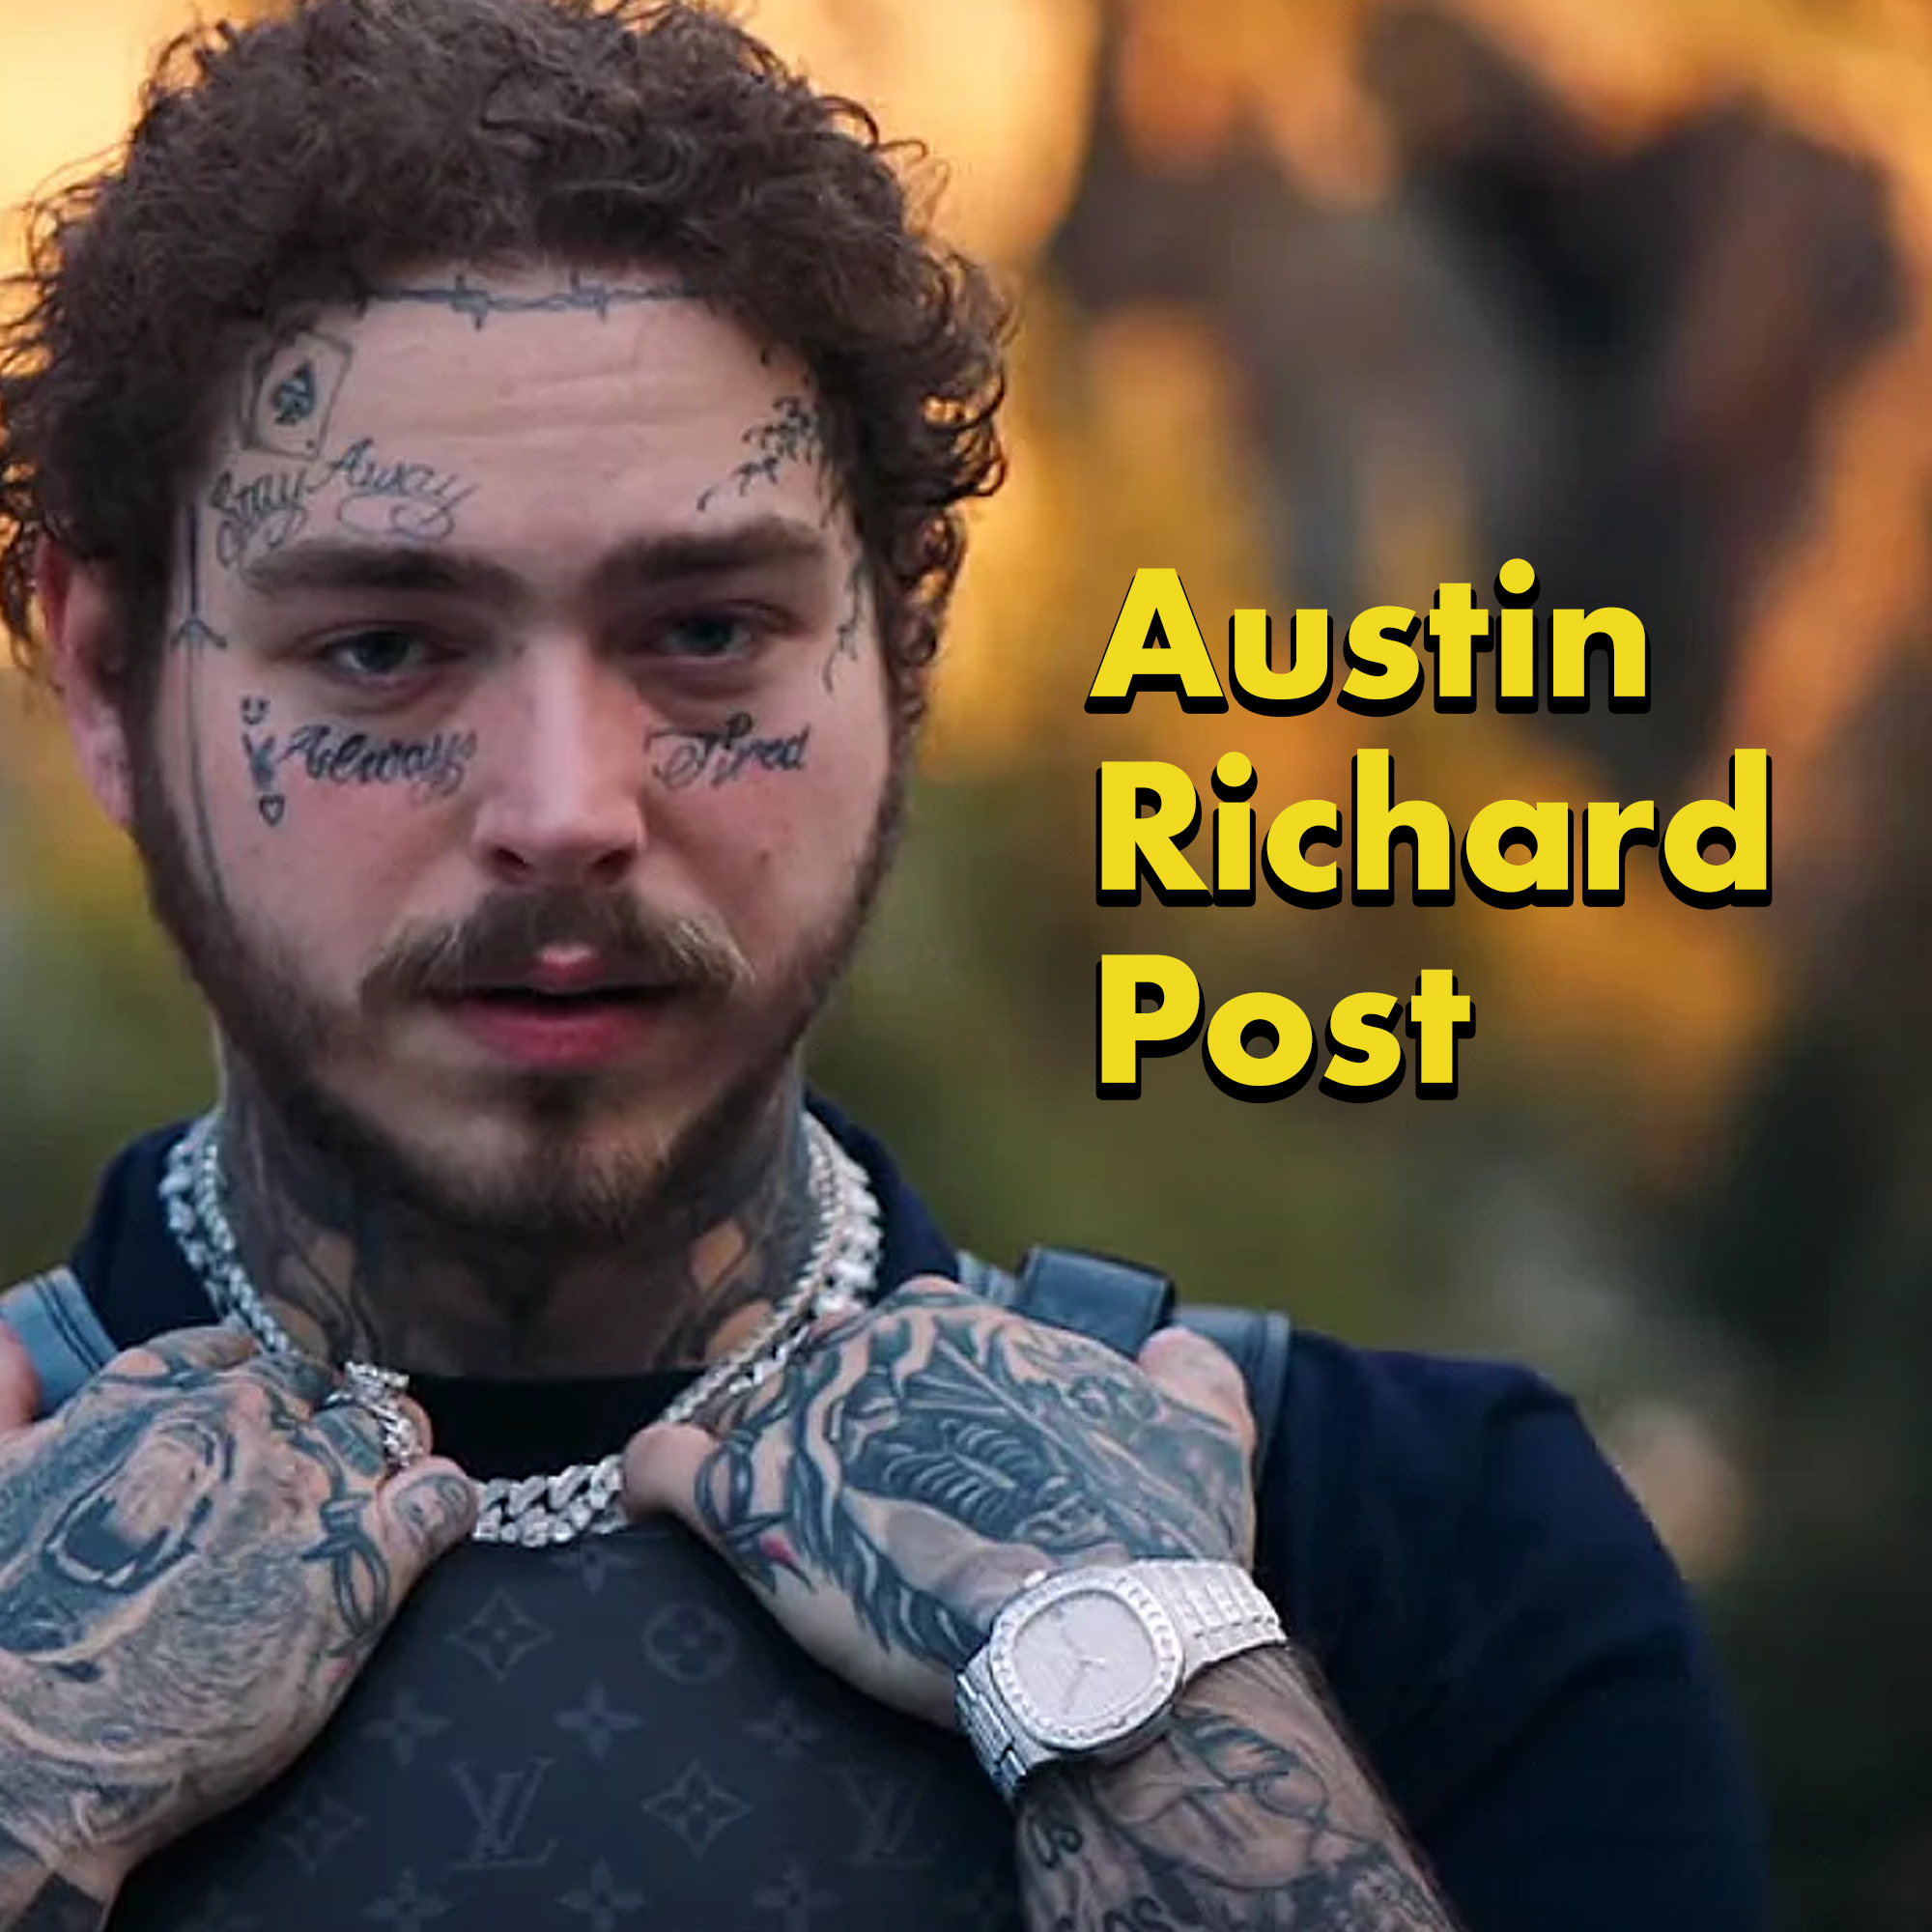 Celebrities' Real Names - post malone